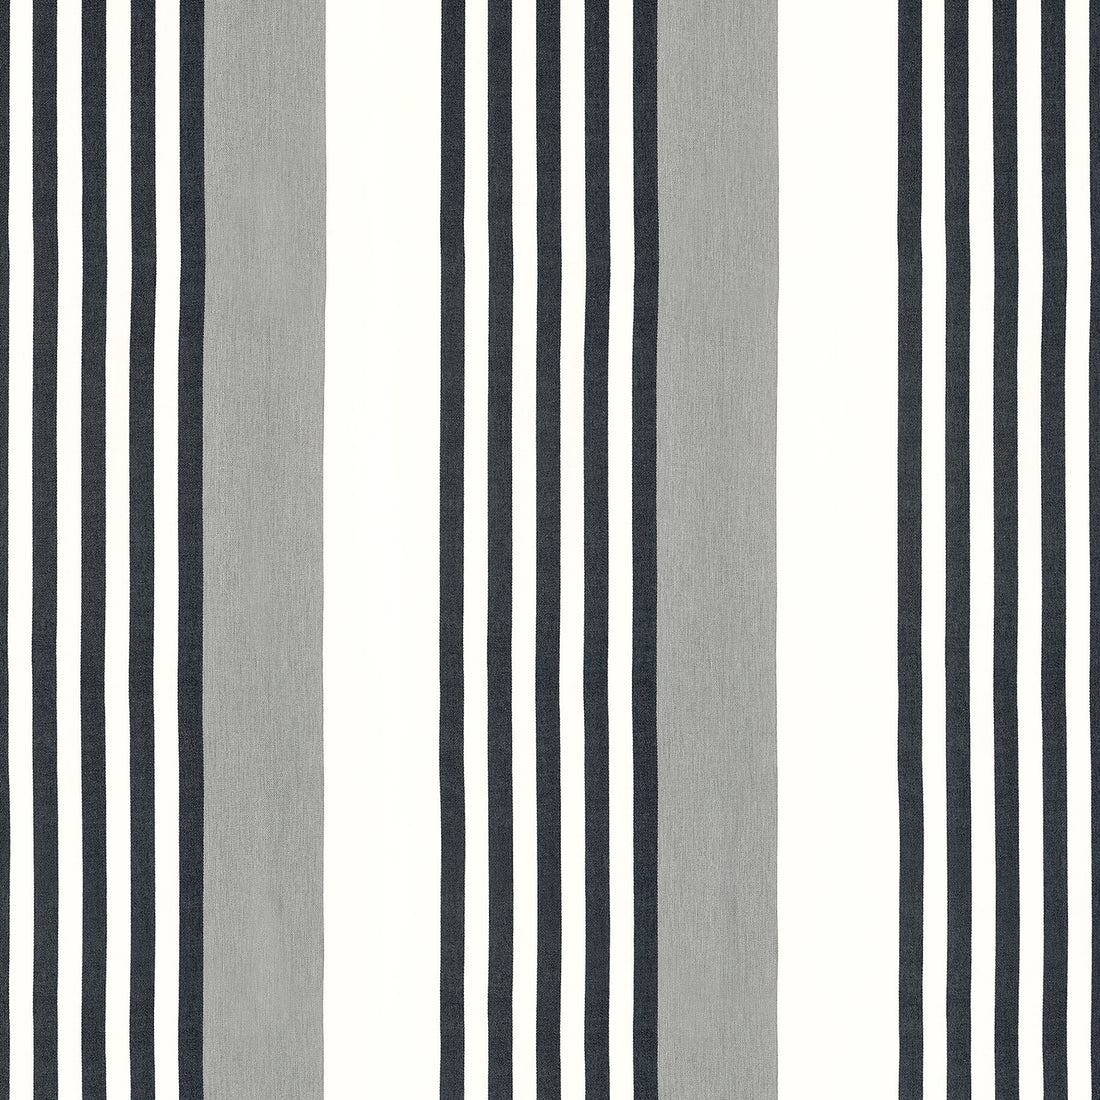 Riviera Stripe fabric in sterling and charcoal color - pattern number FWW81769 - by Thibaut in the Locale Wide Width collection